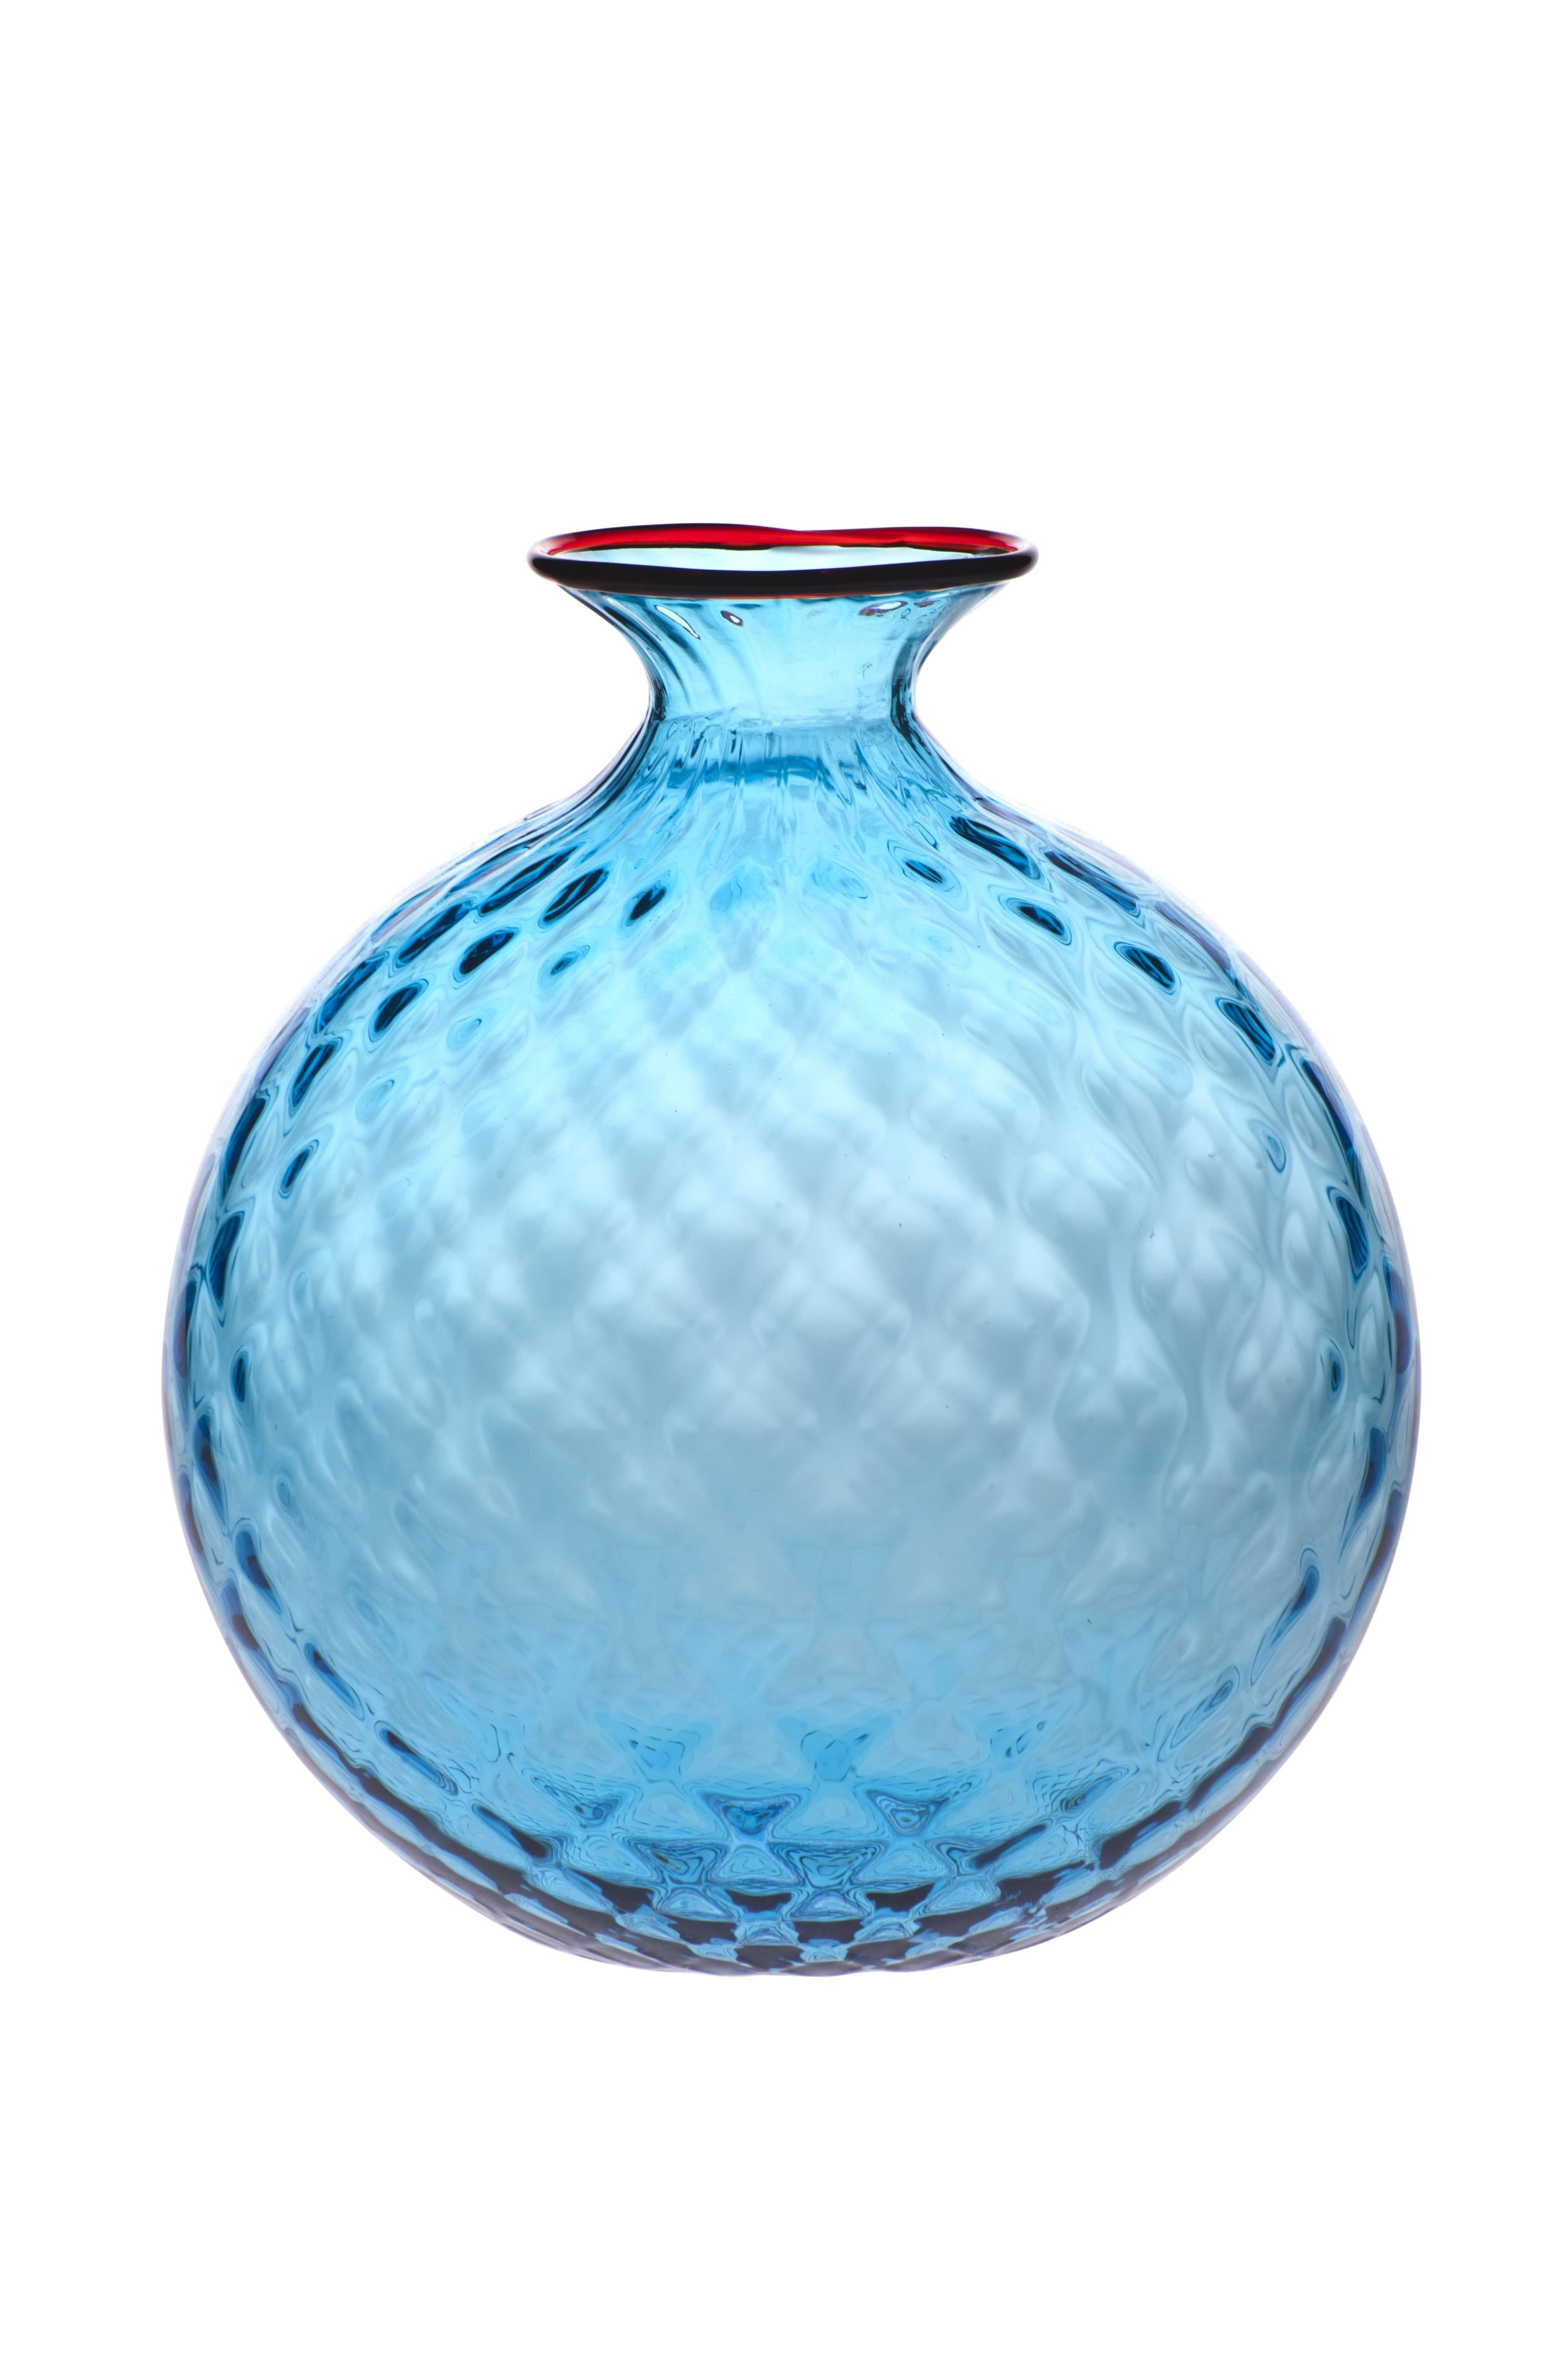 Venini glass vase with full body and textured surface with hexagonal shaped pattern in aquamarine designed in 1970. Perfect for indoor home decor as container or strong statement piece for any room. Also available in other colors on 1stdibs. Limited